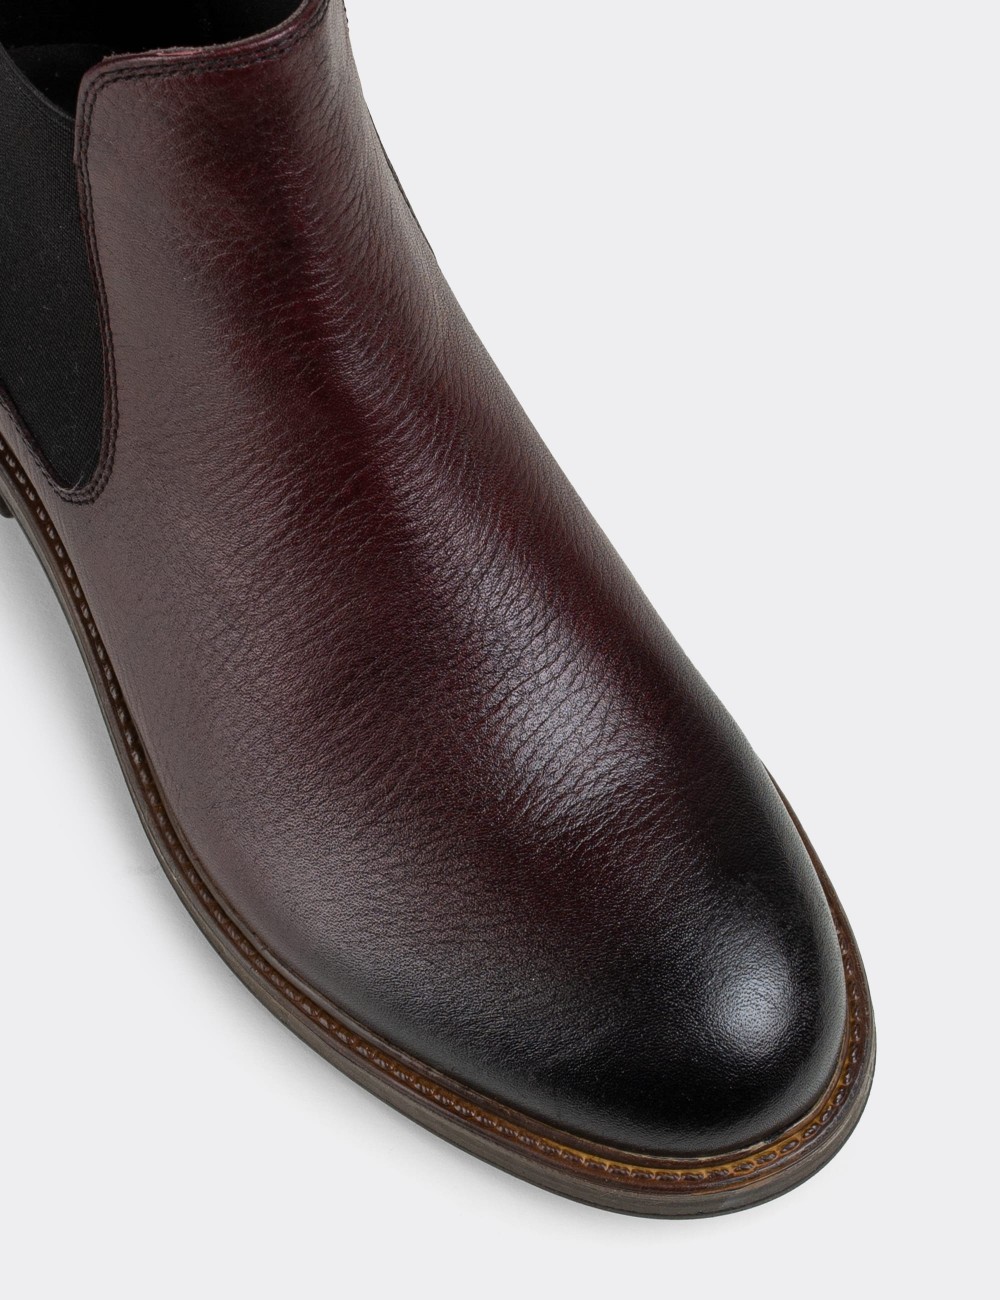 Burgundy  Leather Chelsea Boots - 01620MBRDC13